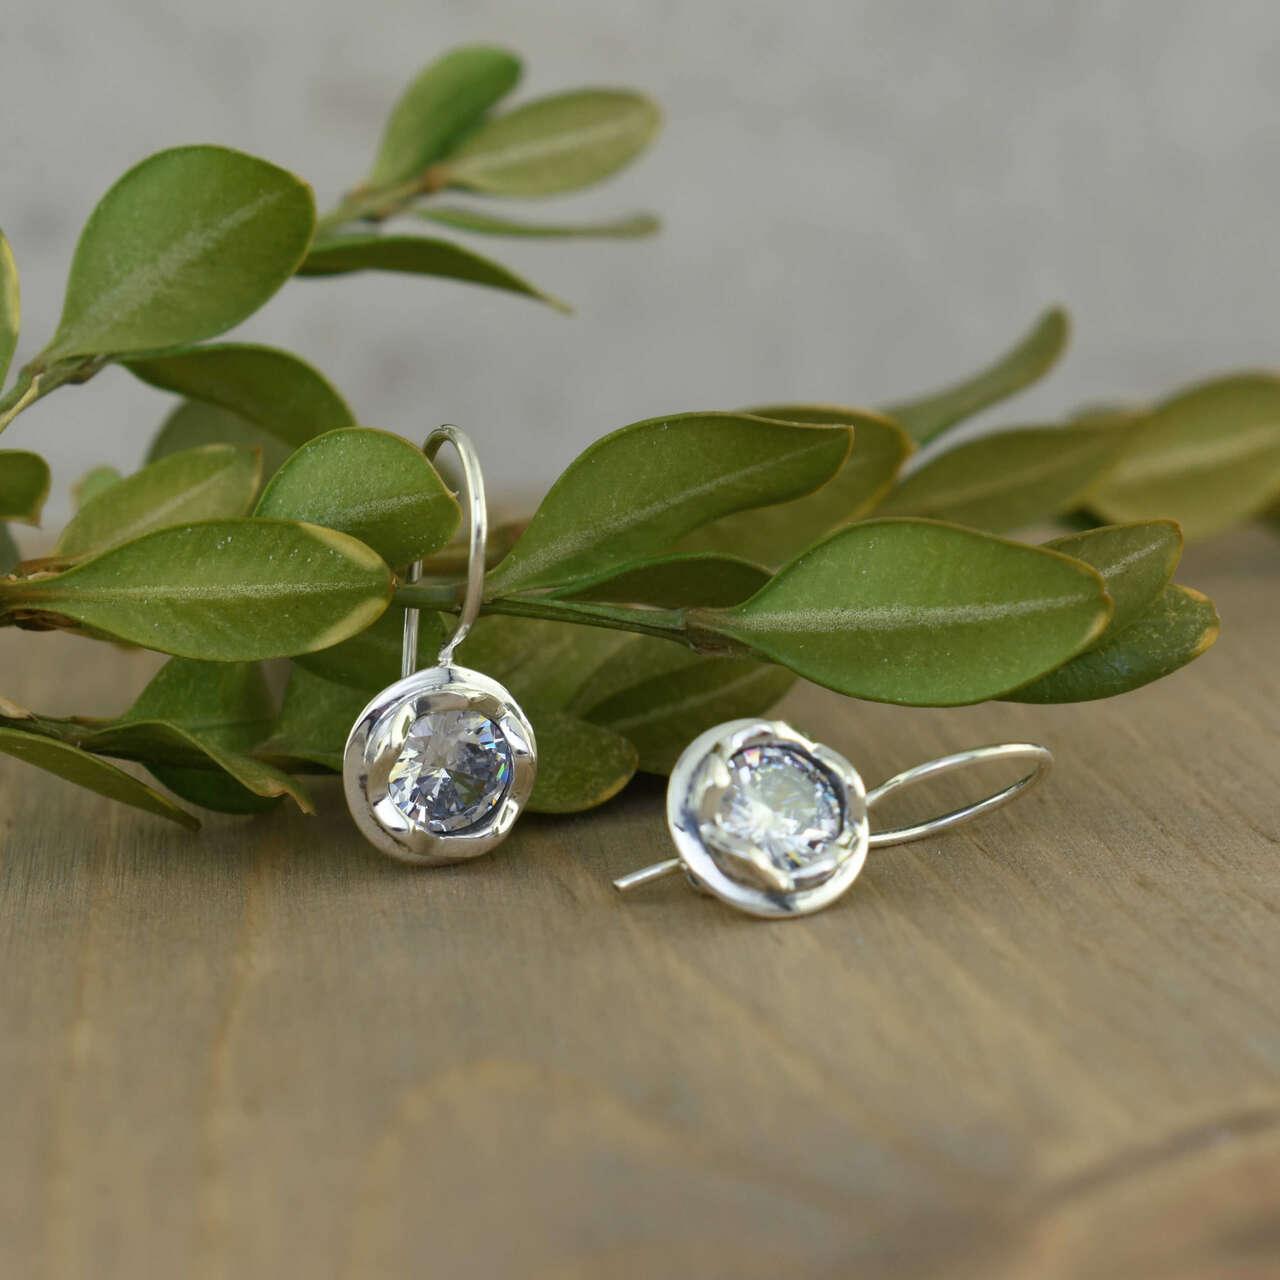 Handcrafted sterling silver earrings with faceted CZ